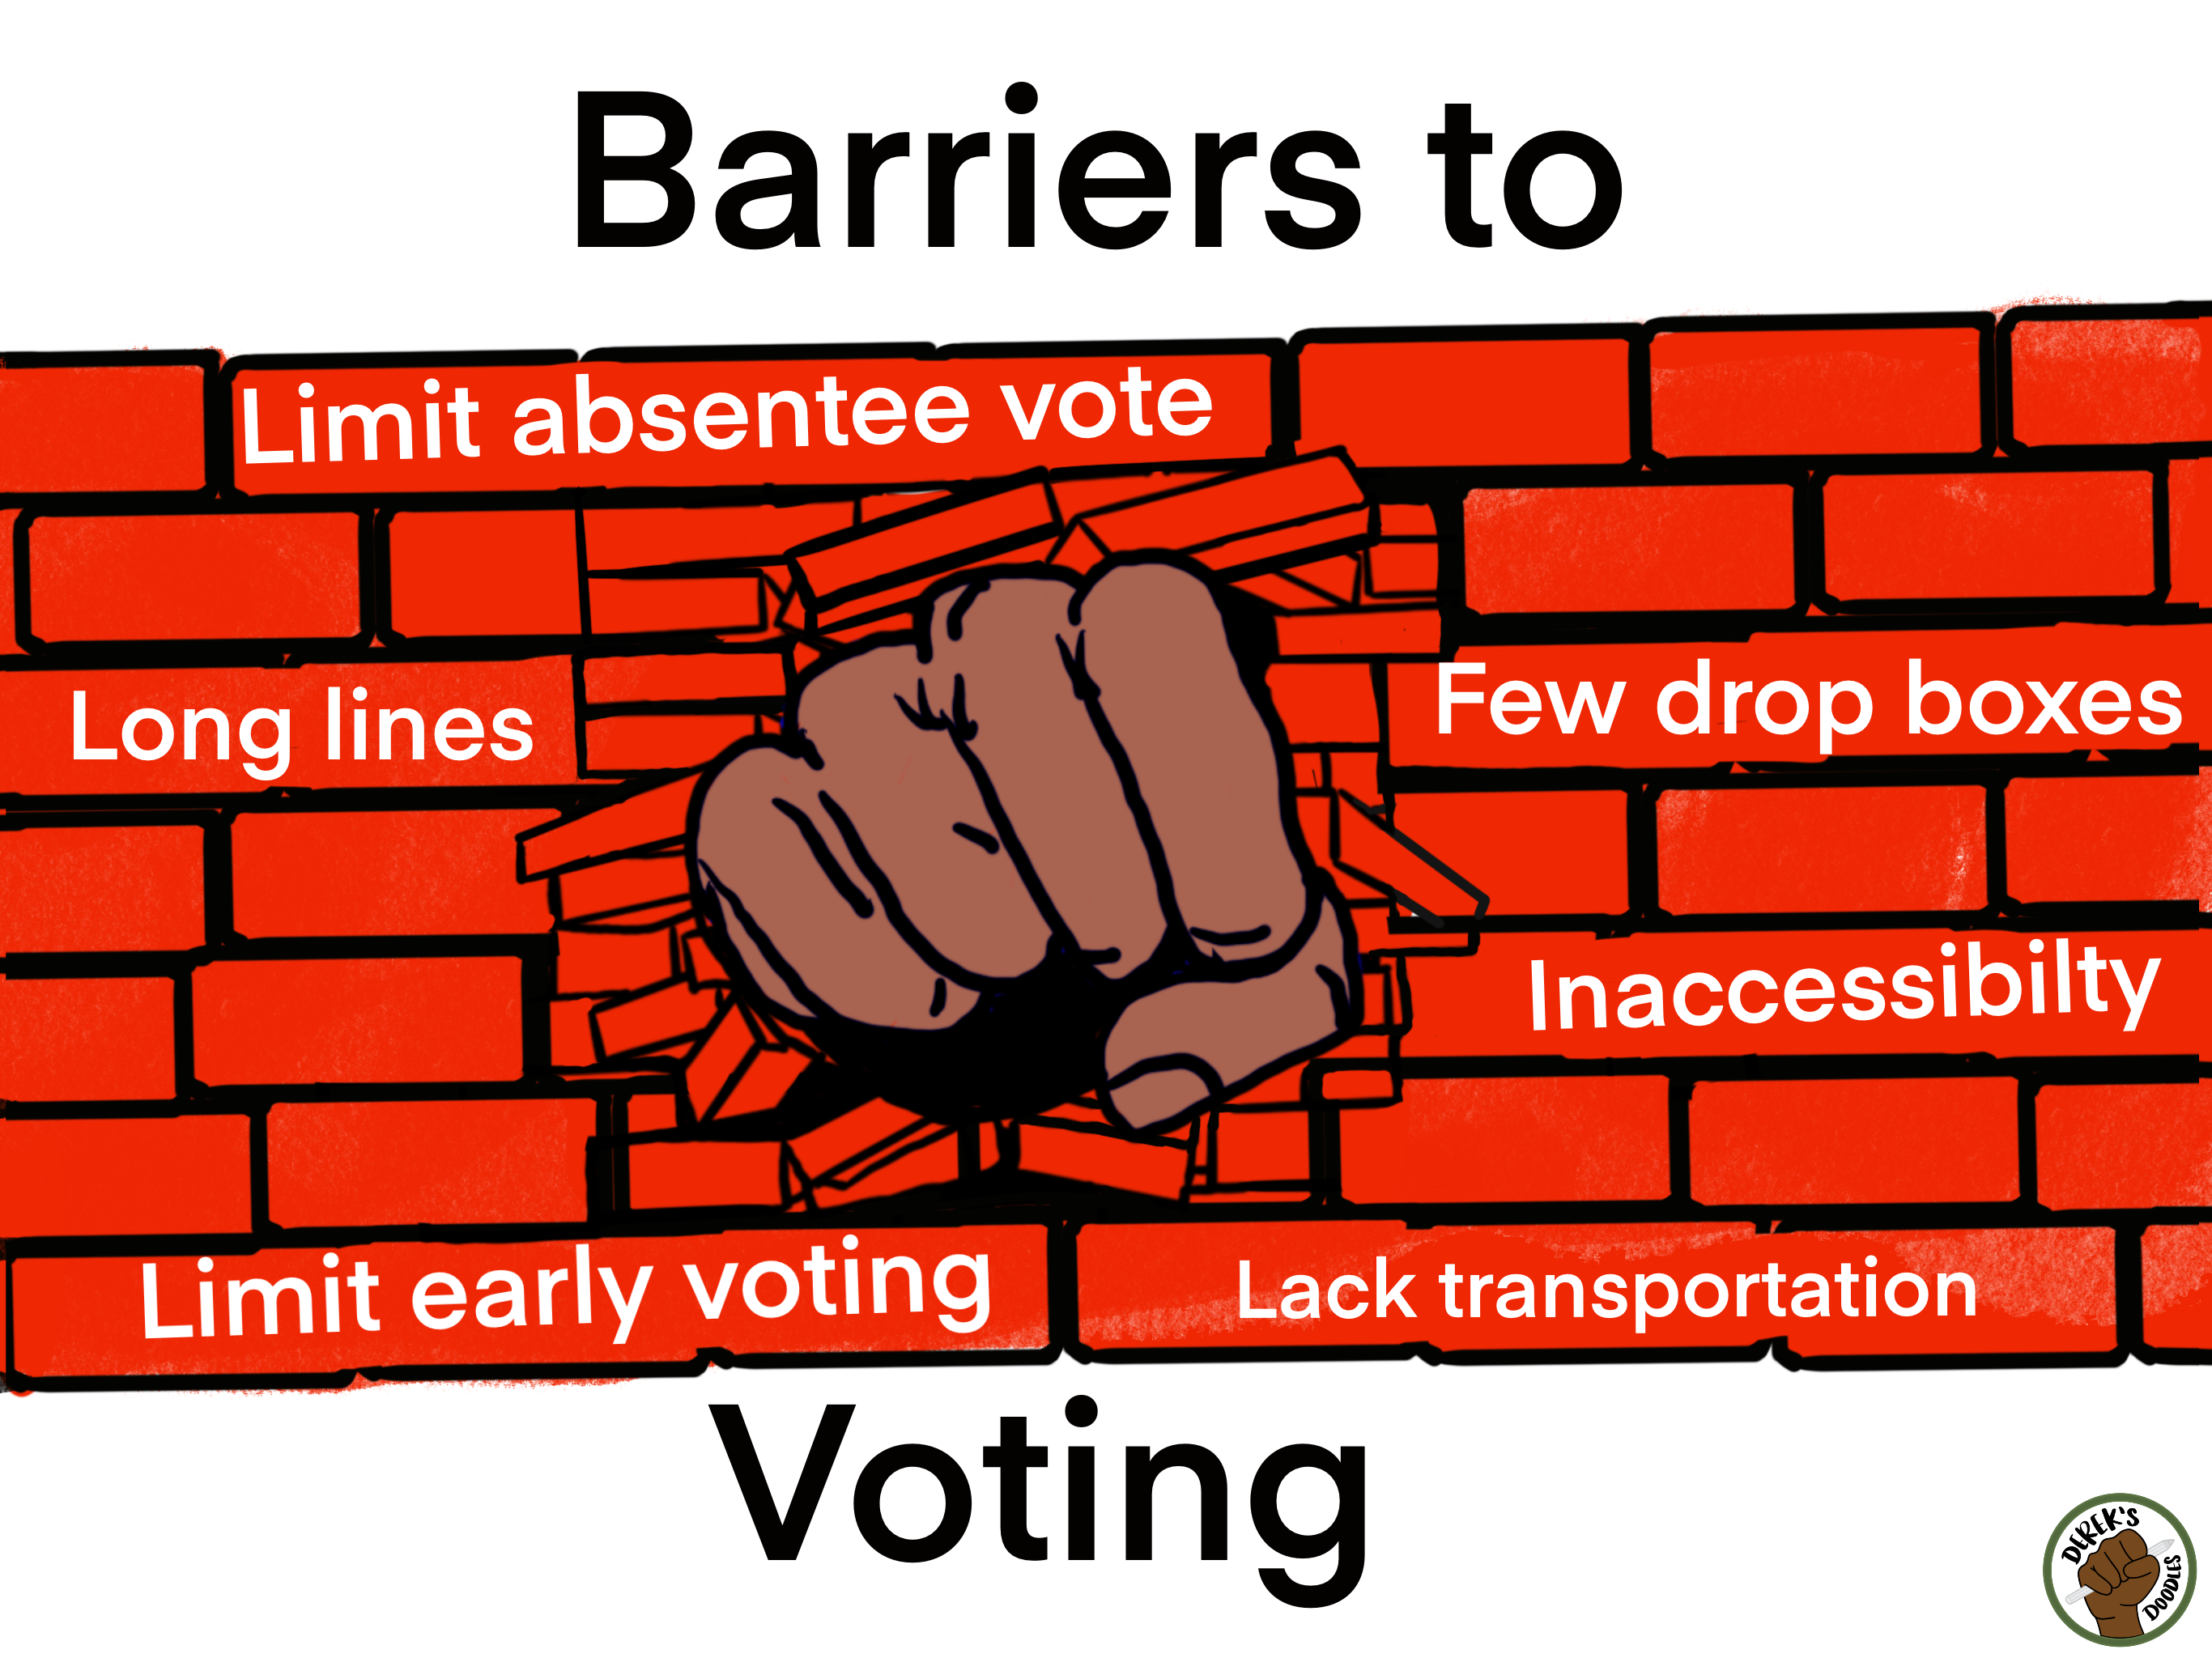 A brown first punches through a red brick wall. The bricks have labels like “Limit absentee voting,” “long lines,” “limit early voting,” “few drop boxes,” “inaccessibility,” and “lack transportation.” Above and below the drawing, the title says Barriers to Voting. In the bottom right corner is the logo for Derek’s Doodles.